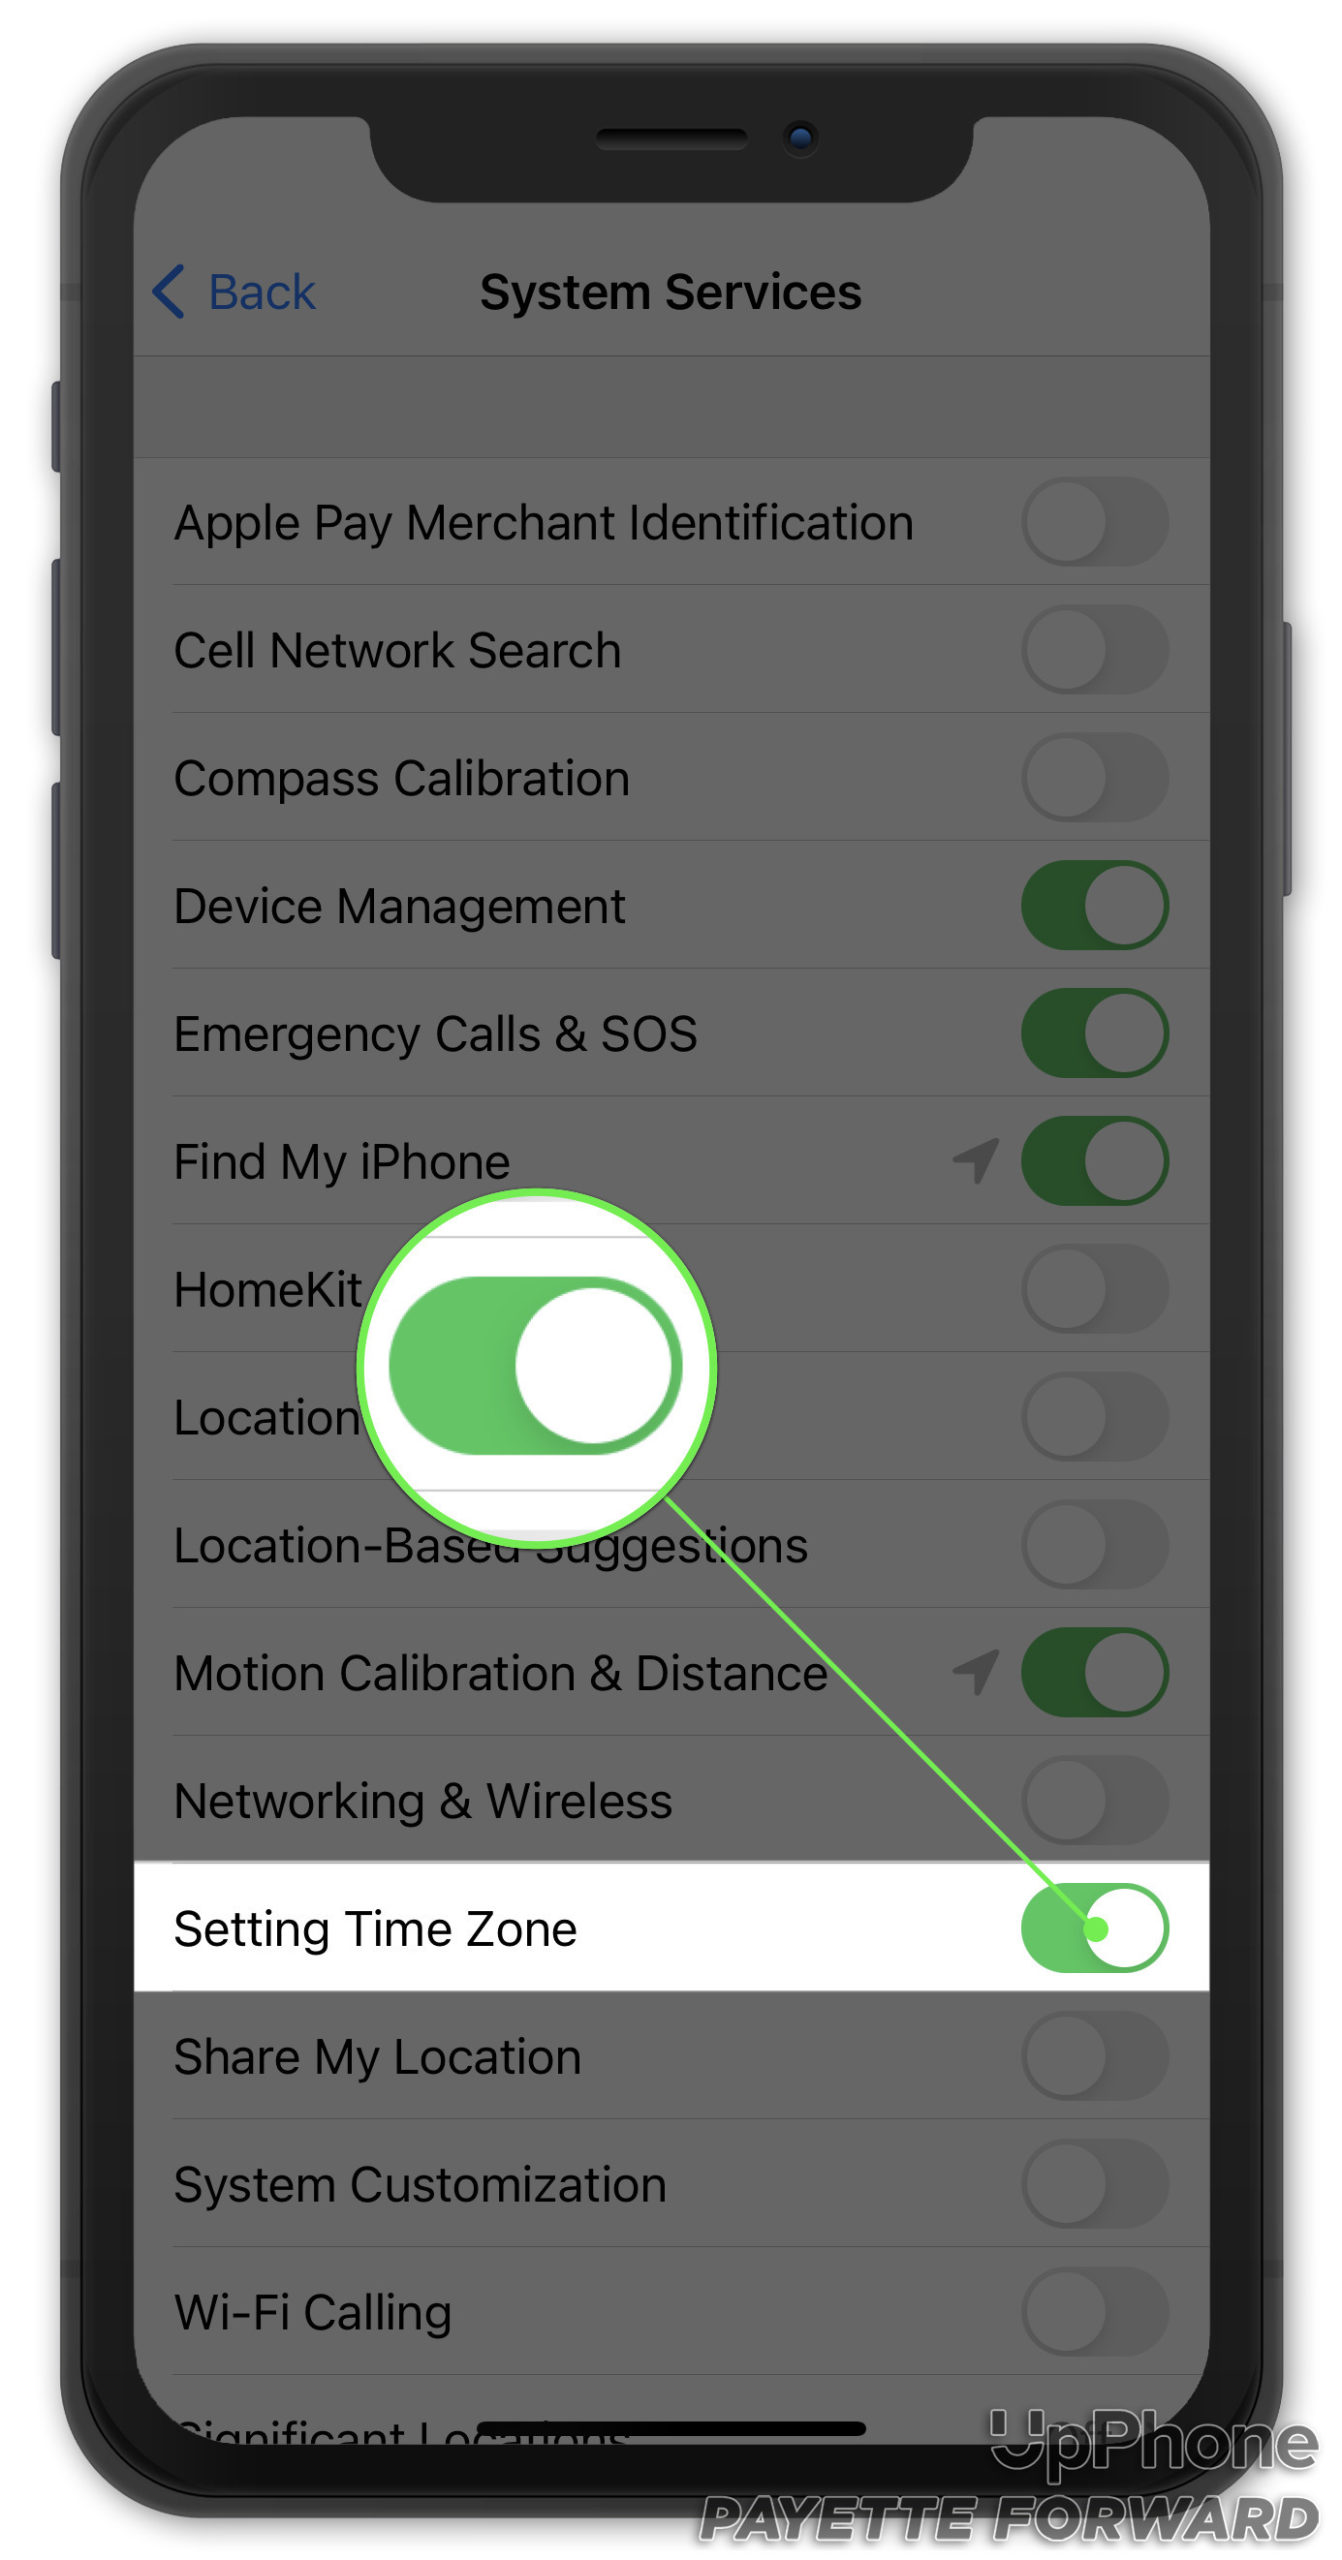 tap setting time zone in system services